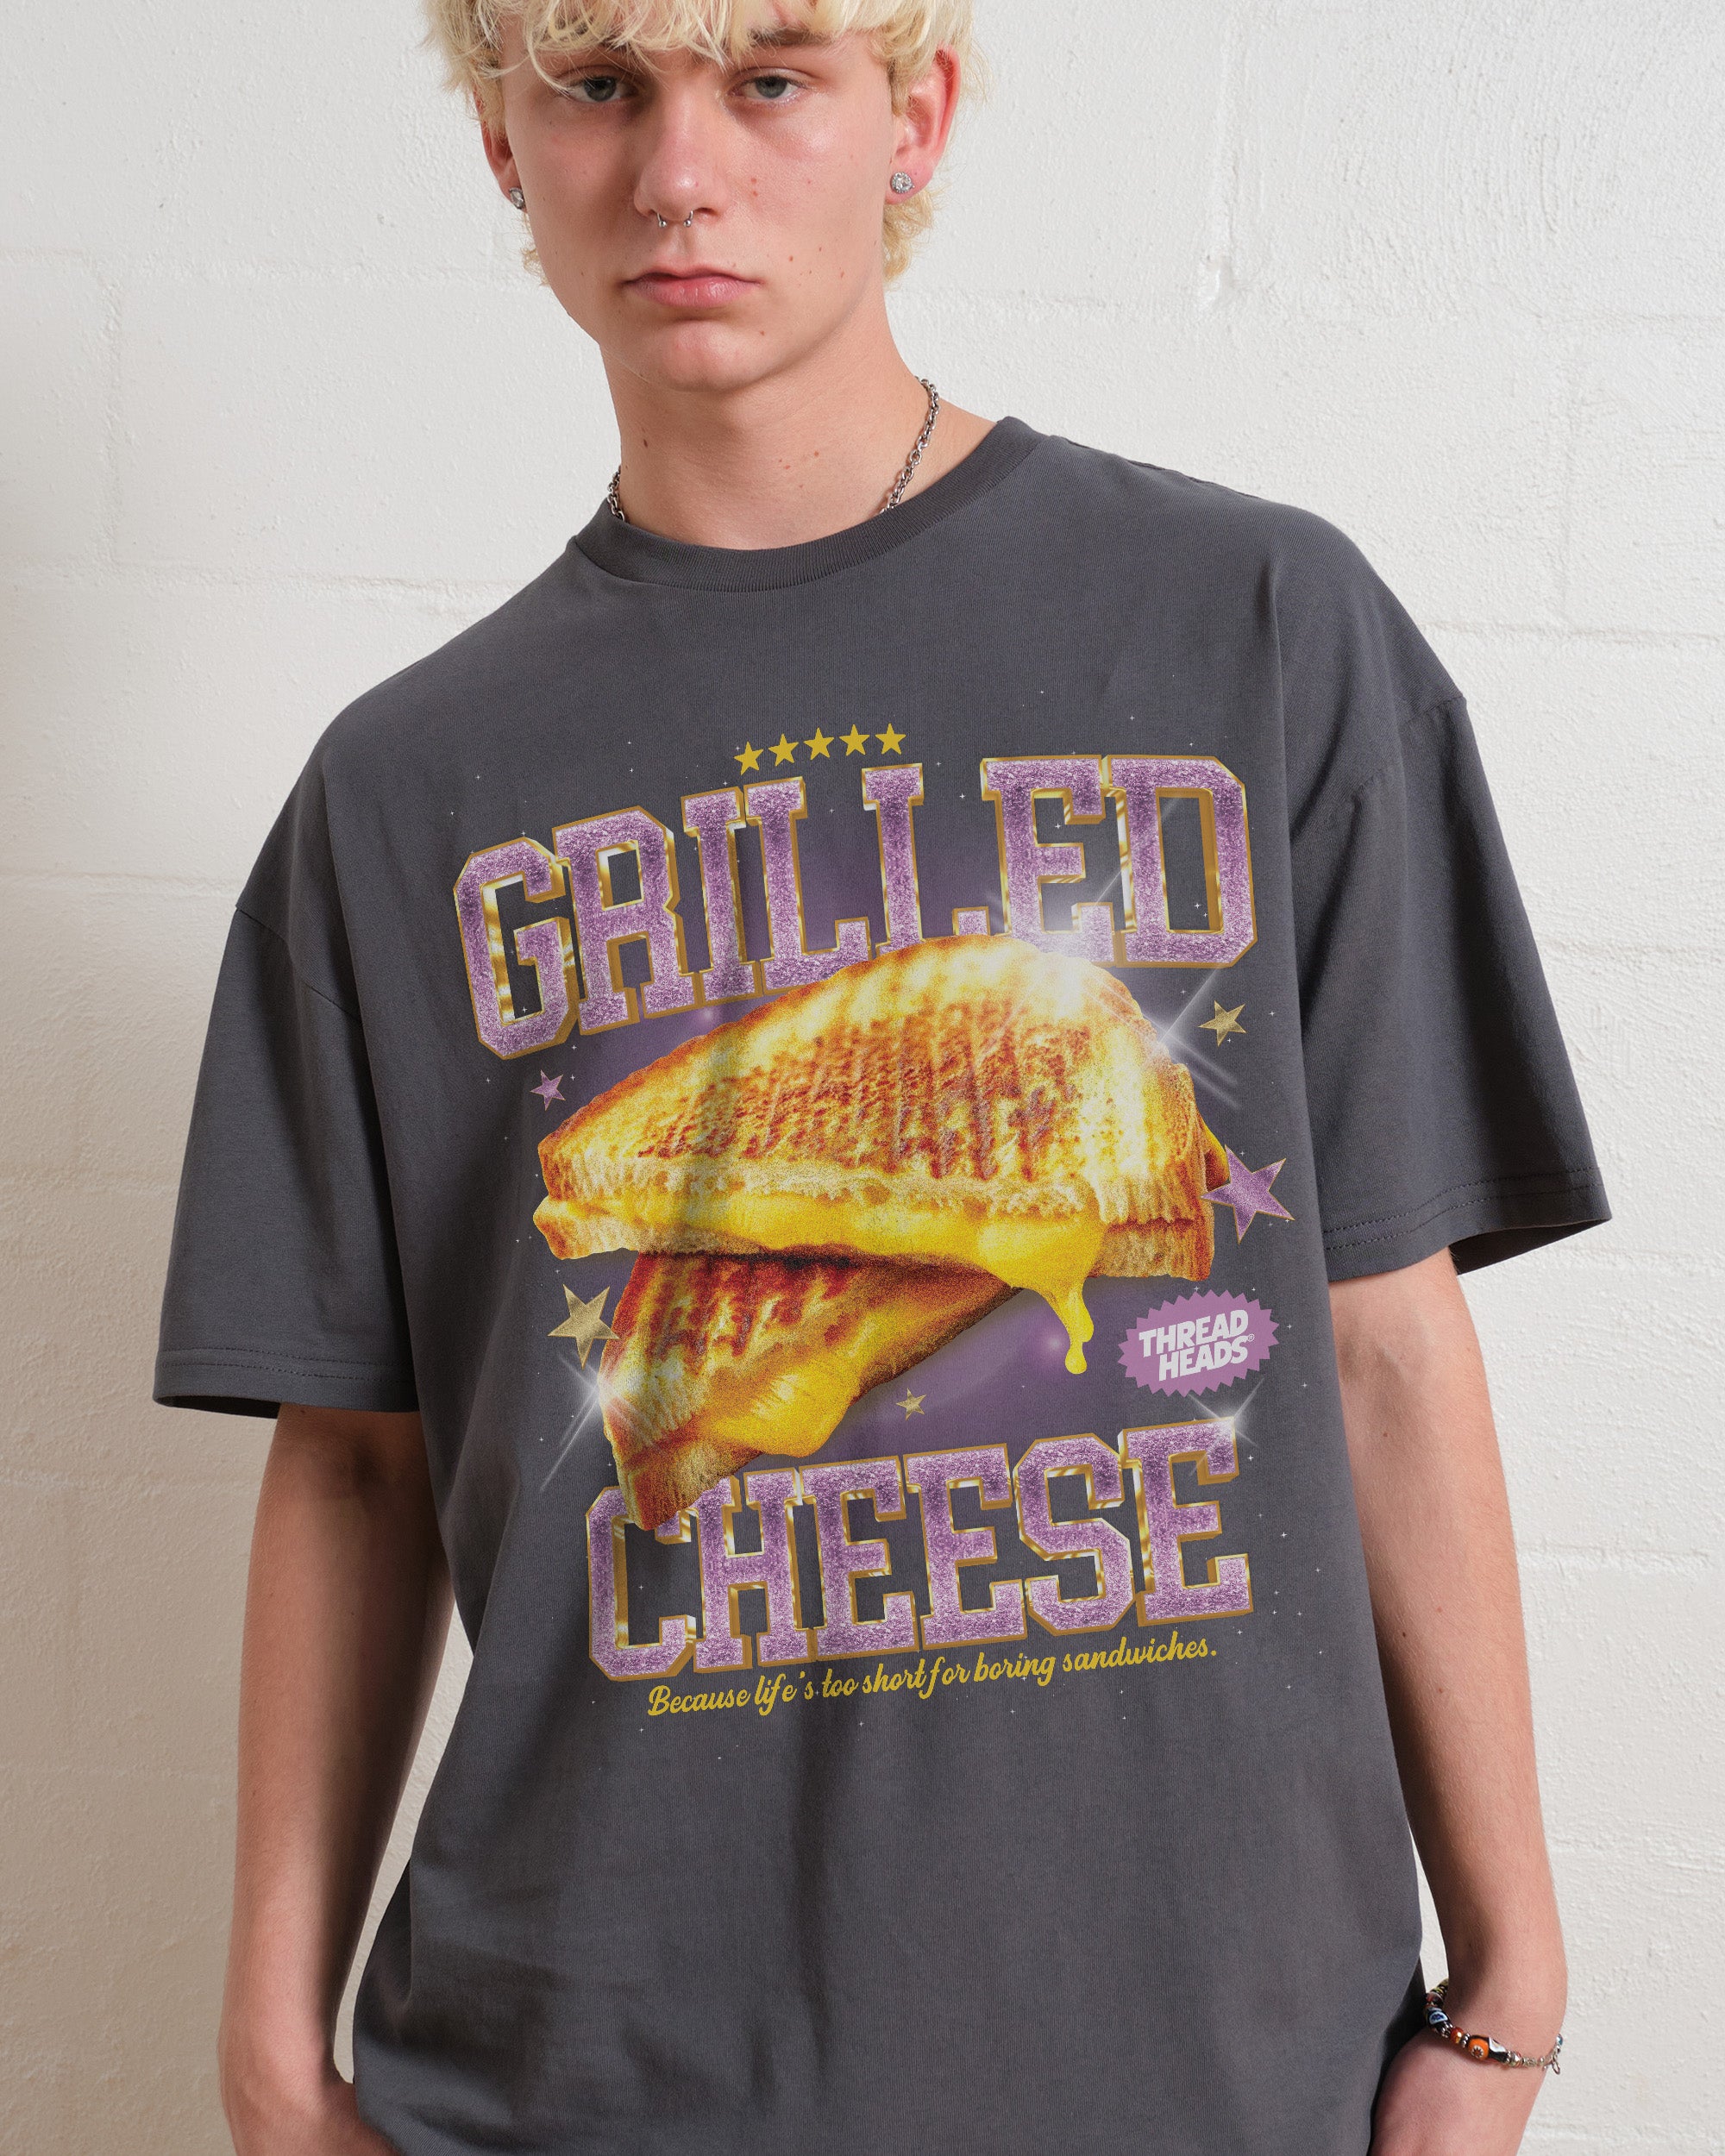 Grilled Cheese T-Shirt Australia Online Coal